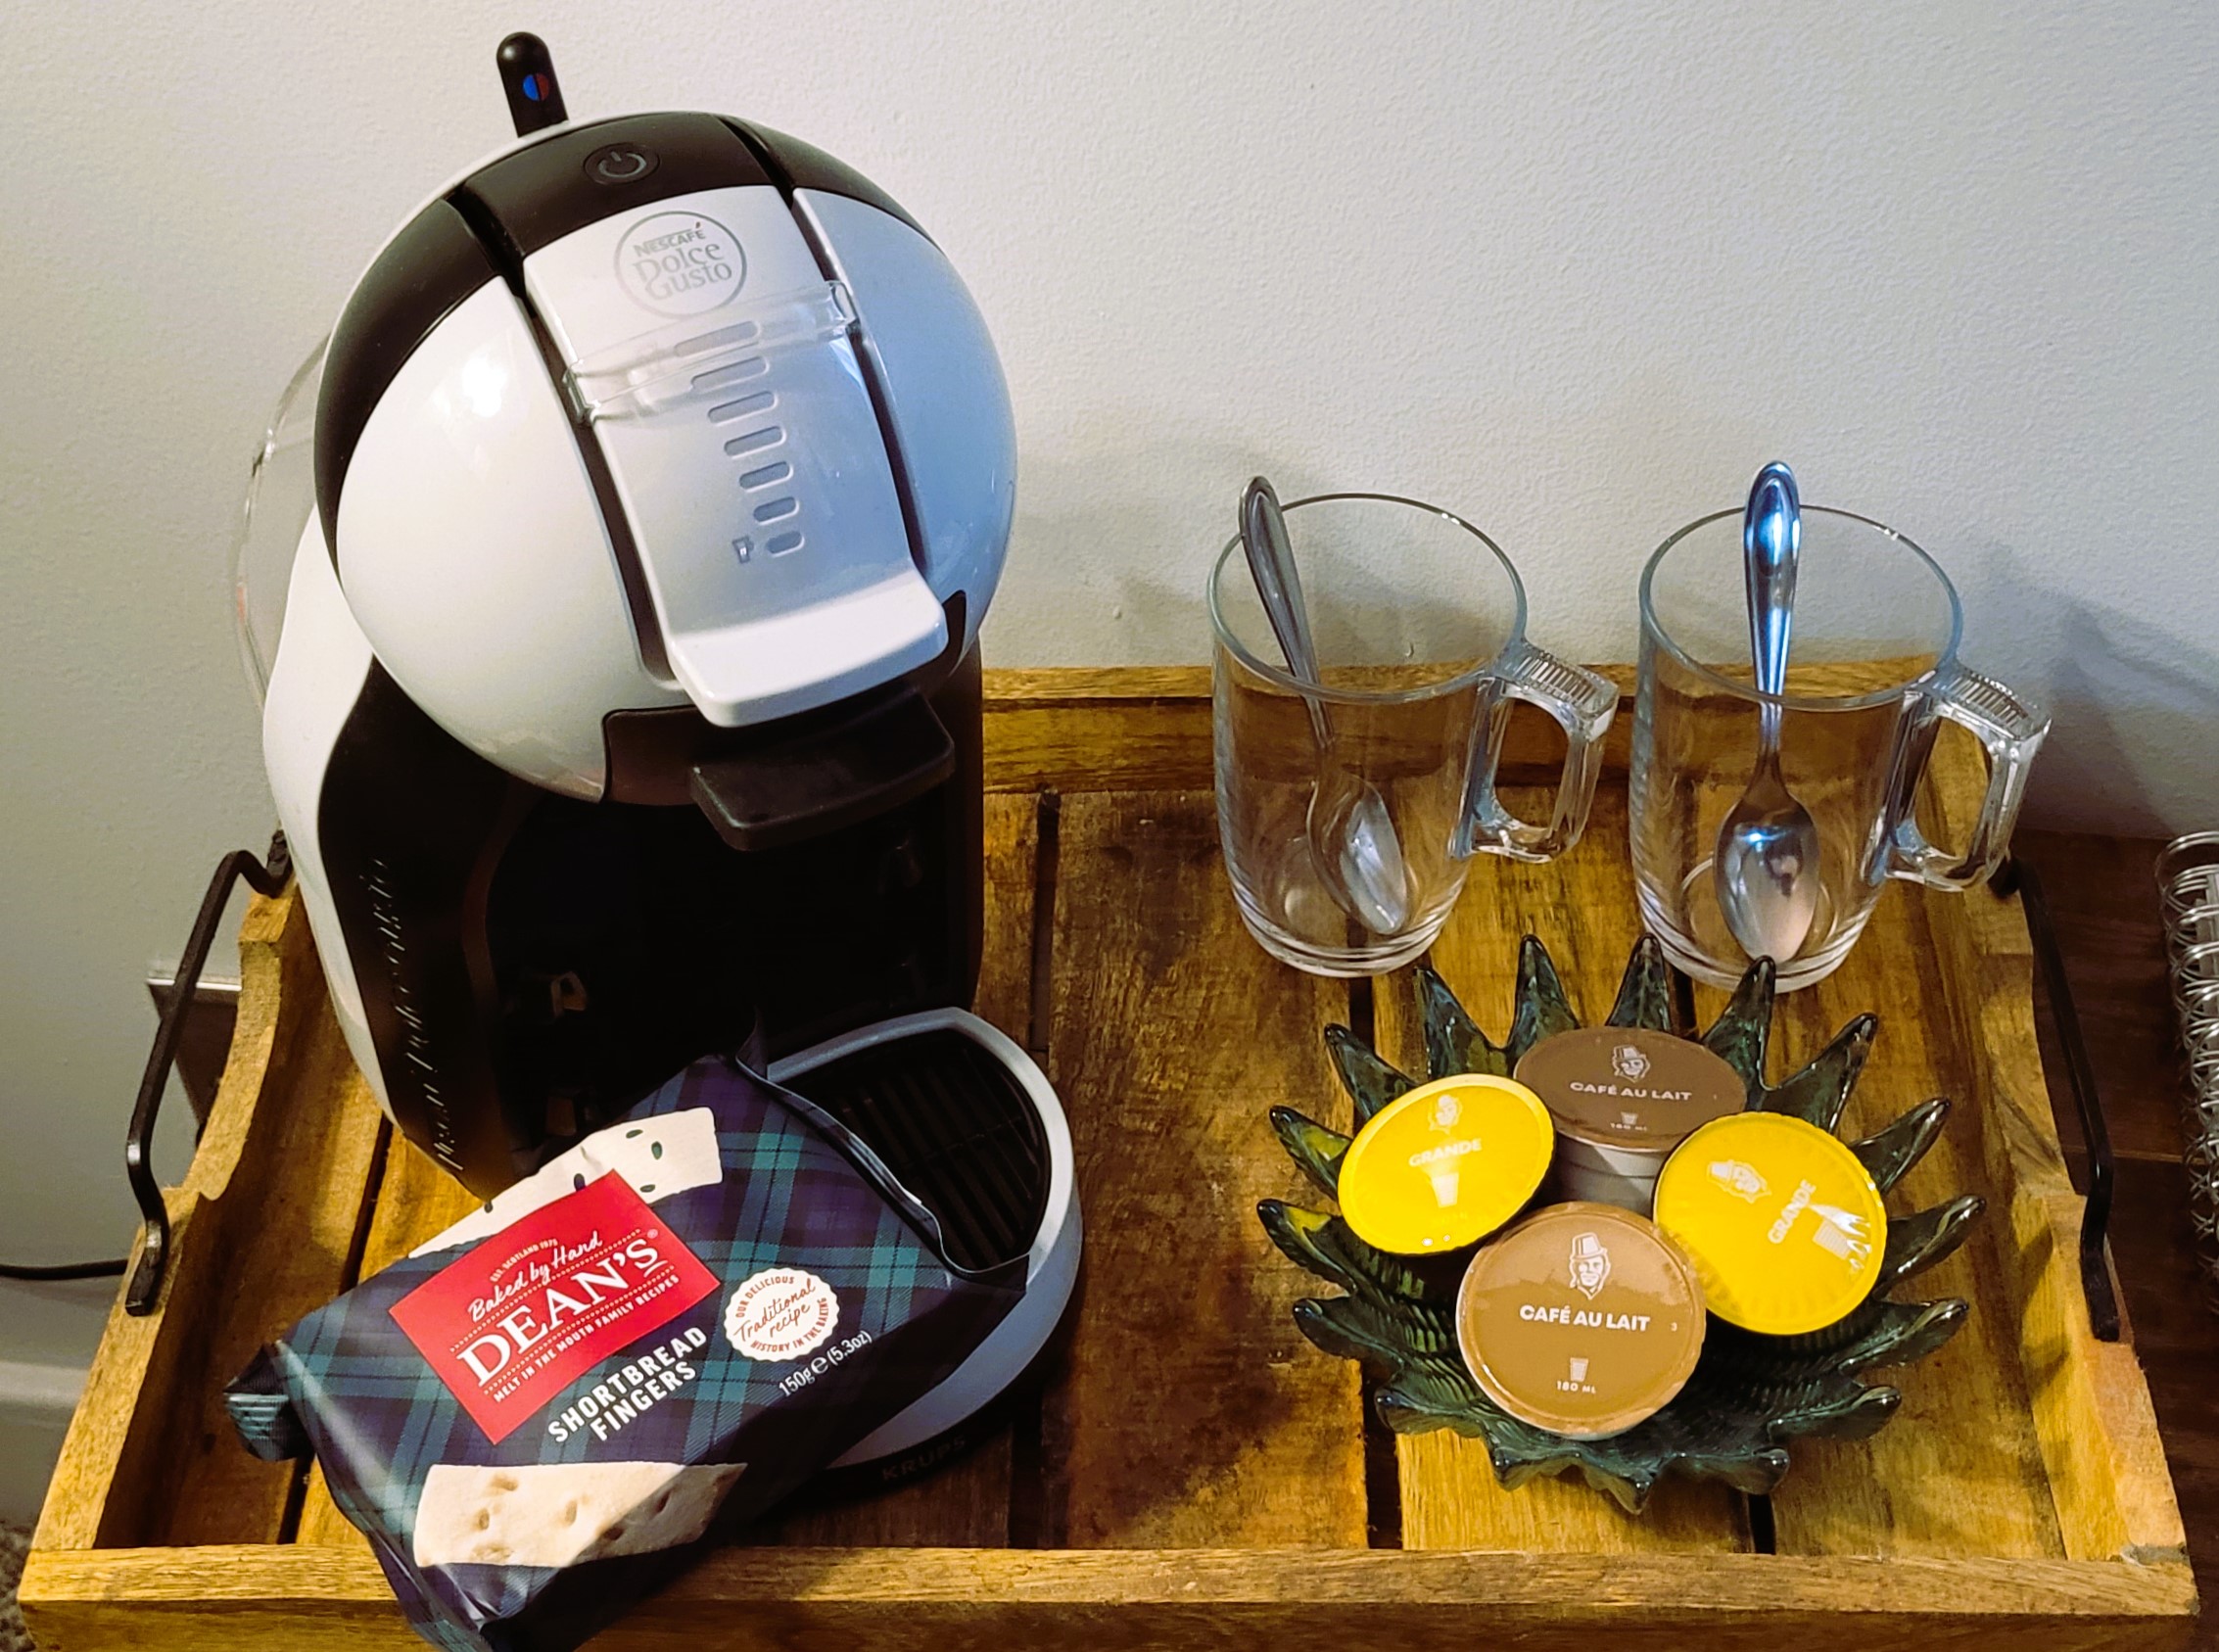 Sit back and enjoy complementary coffee with the Dolce Gusto Mini